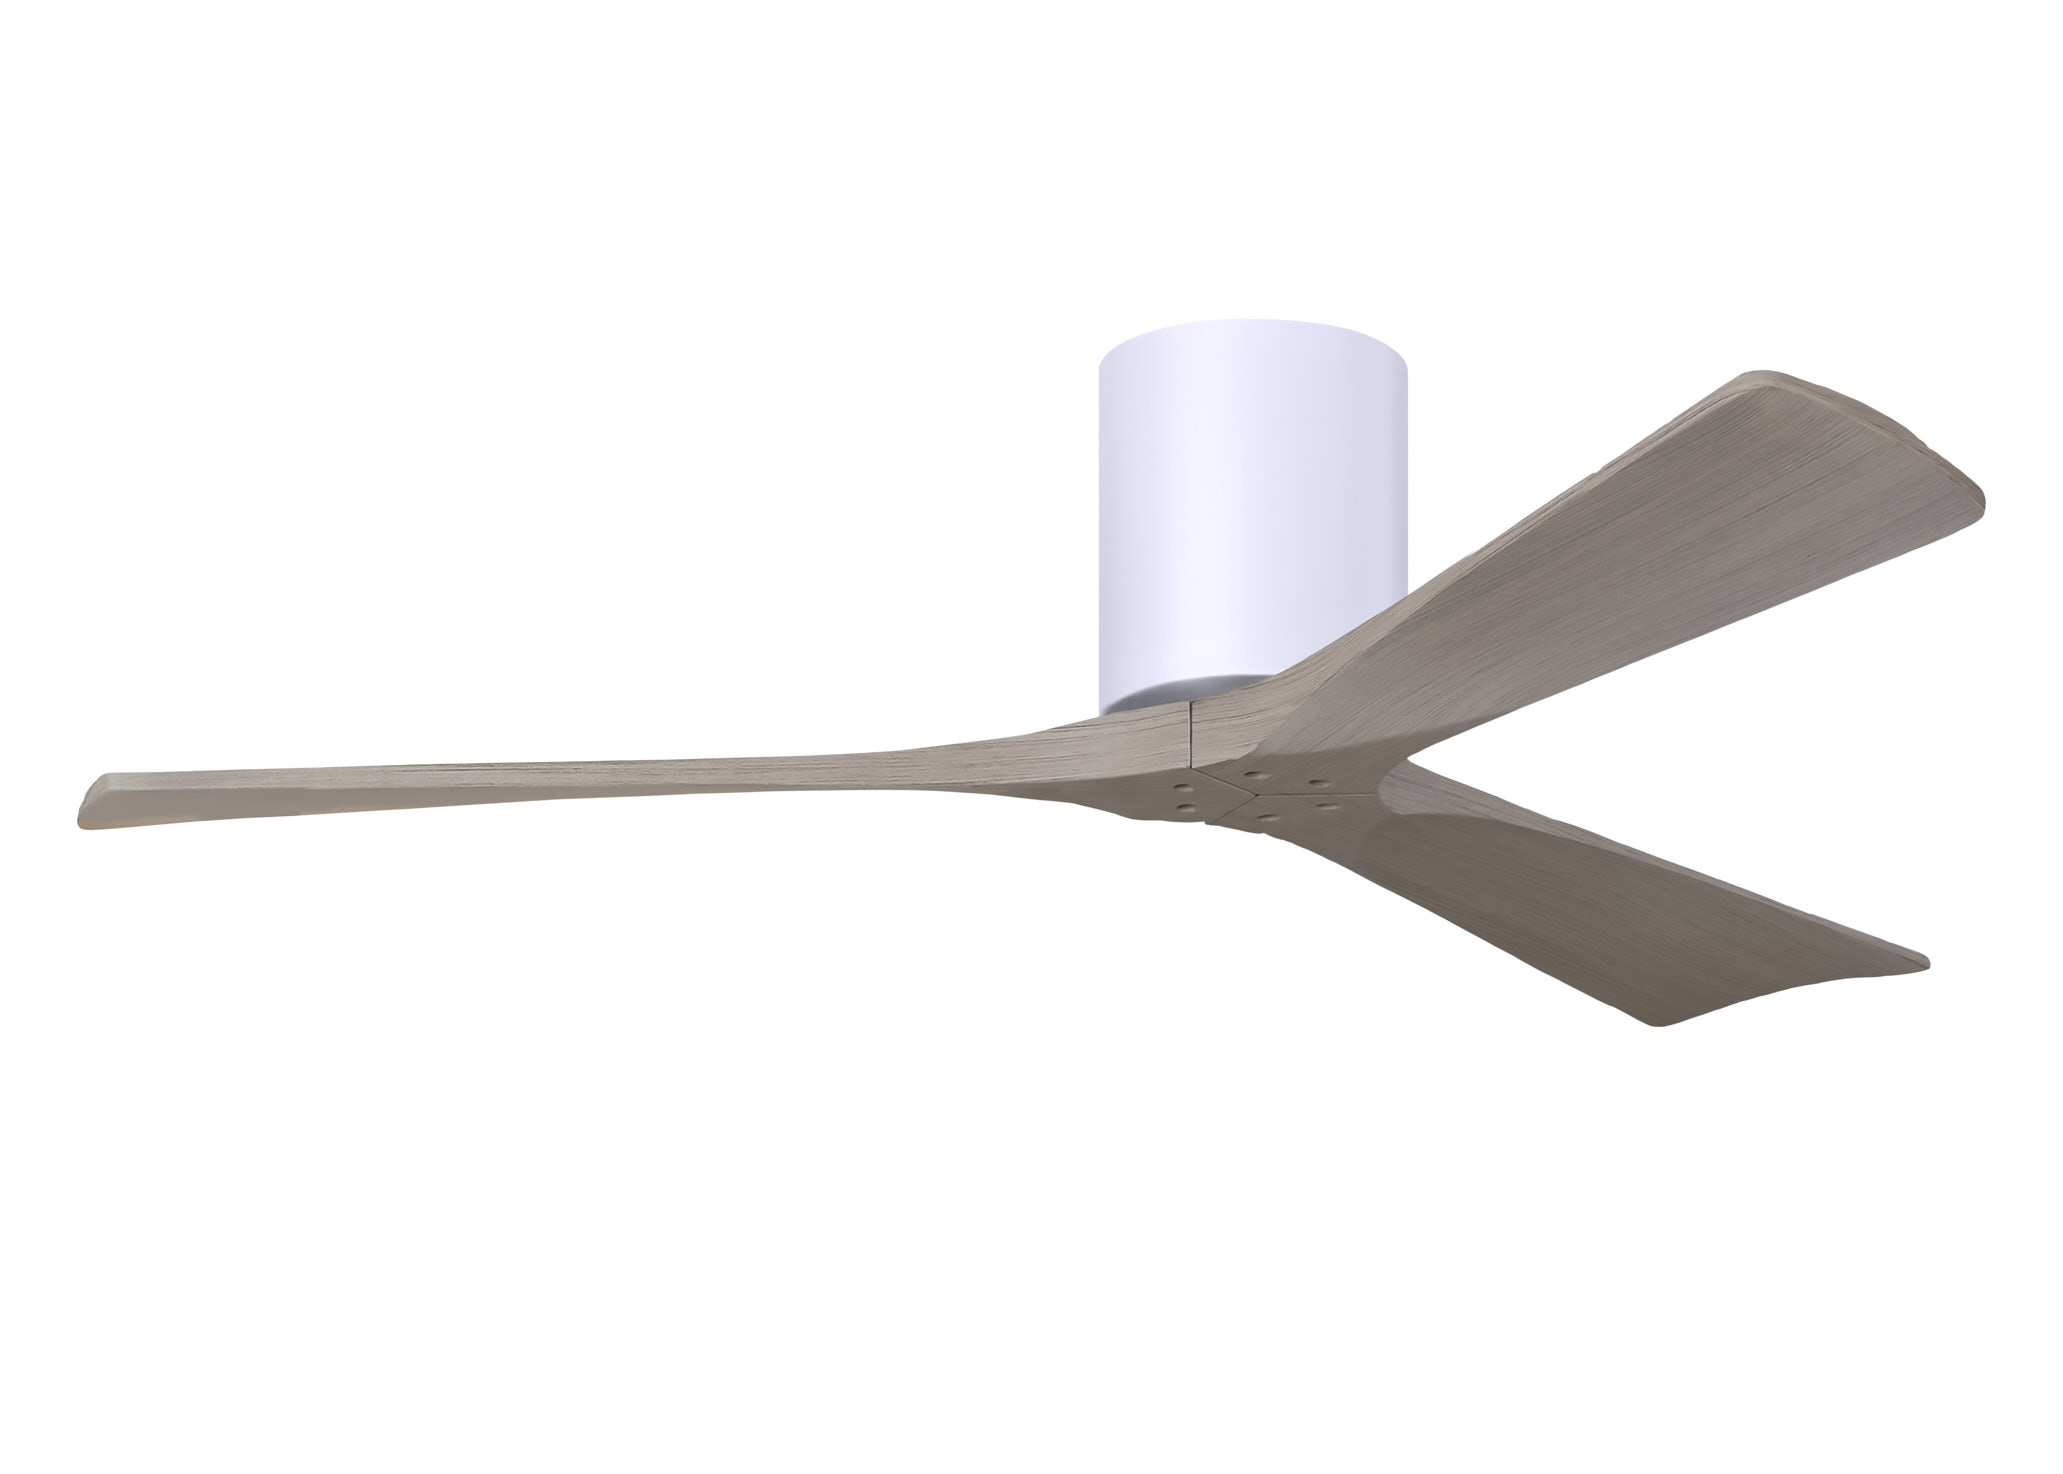 Irene-3H 6-speed ceiling fan in gloss white finish with 52